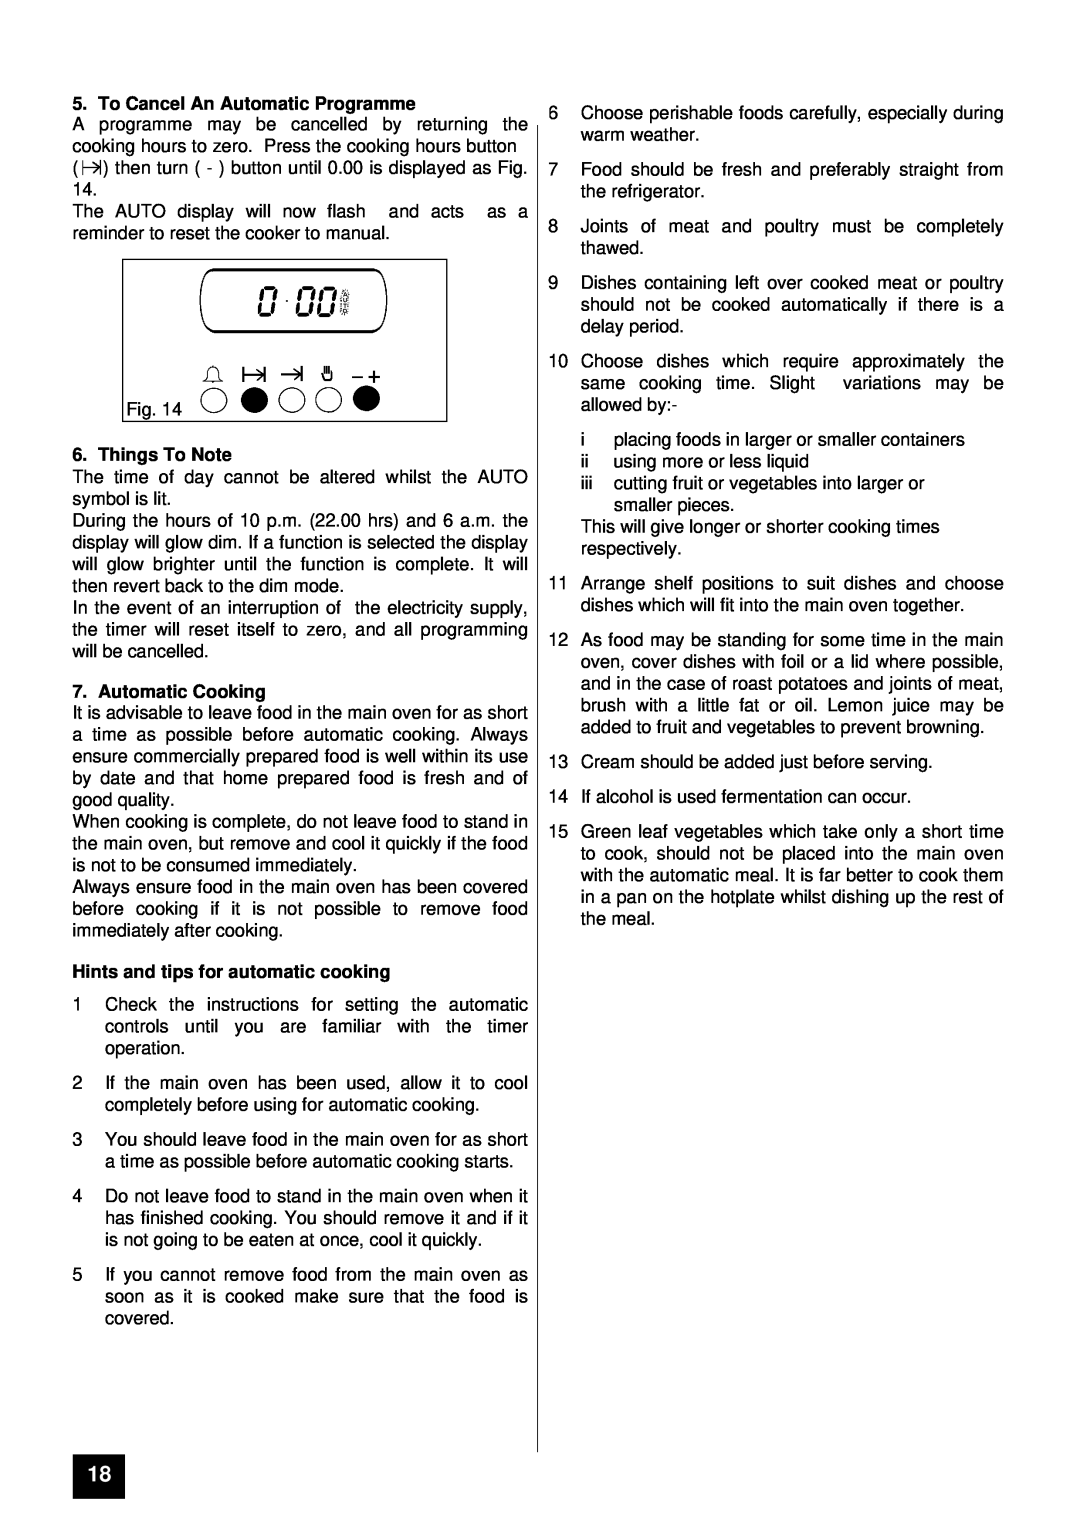 Tricity Bendix TBD903 installation instructions To Cancel An Automatic Programme, Things To Note, Automatic Cooking 